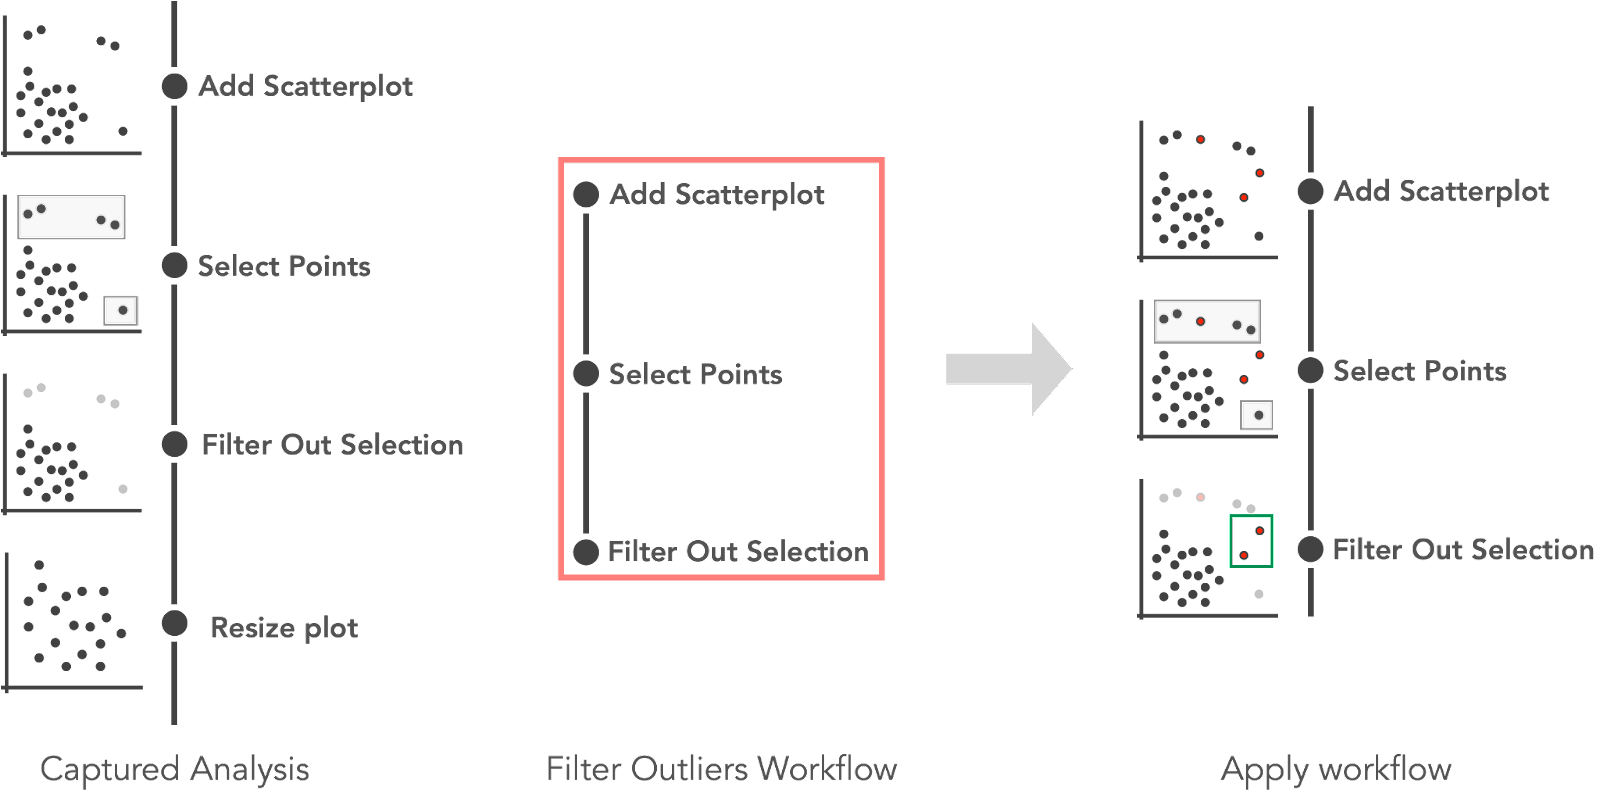 The figure shows captured analysis in the first column, curated workflow in the second column, and results of applying the workflow in the third column. The captured analysis has four steps — add scatterplot, select points, filter out selections, and resize plot. The curated workflow has three steps — add scatterplot, select points and filter out selections. The workflow is labeled ‘Filter outliers workflow.’